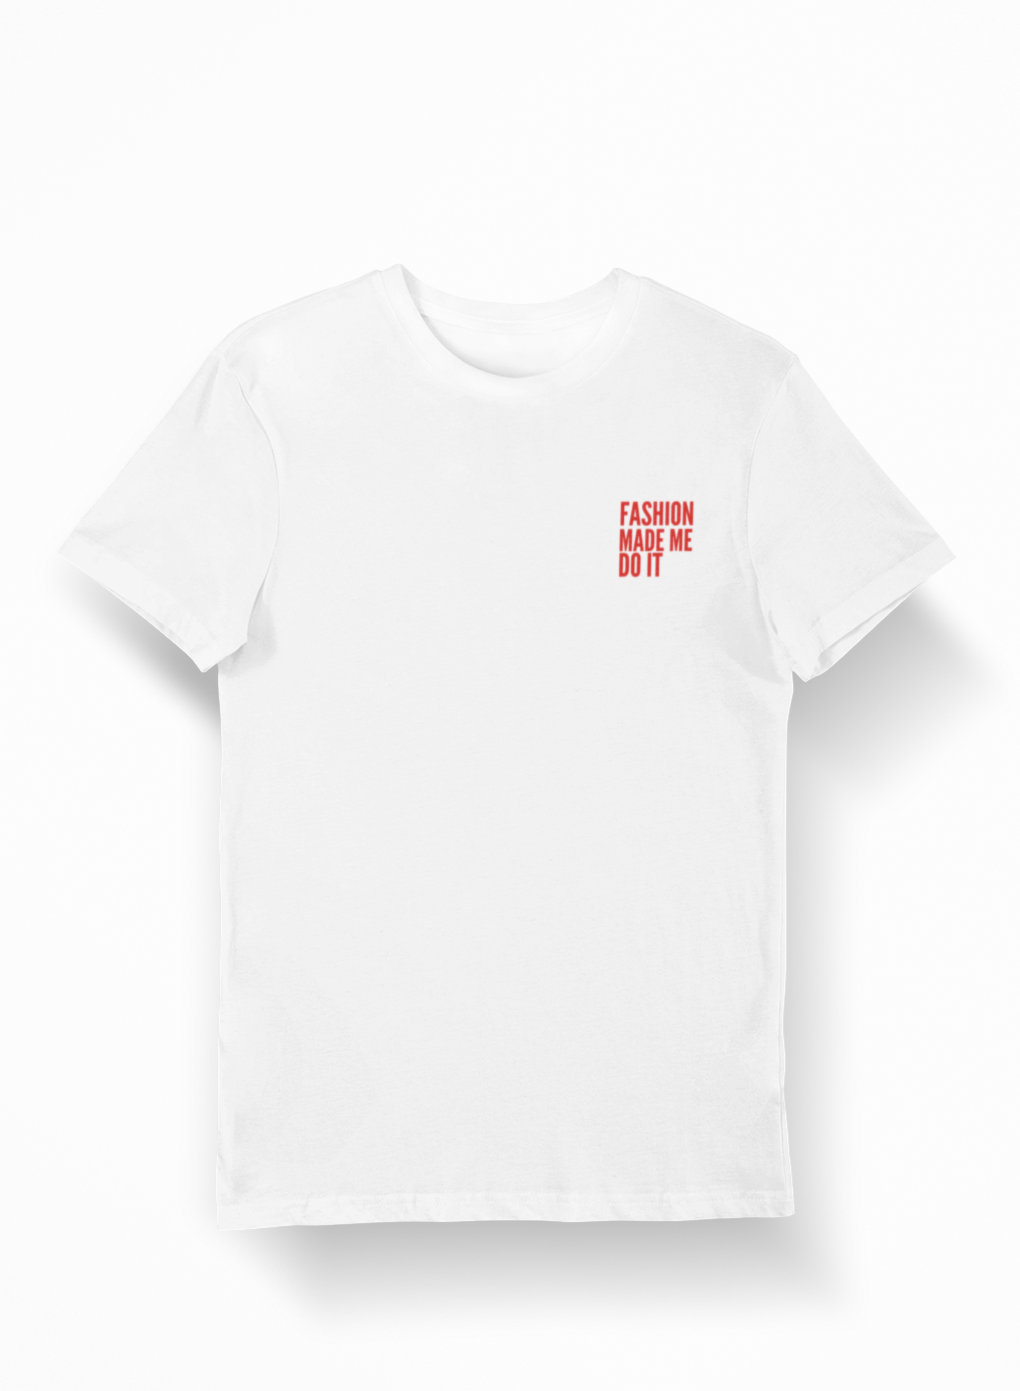 Fashion Made Me Do It Unisex Tee WHITE/RED